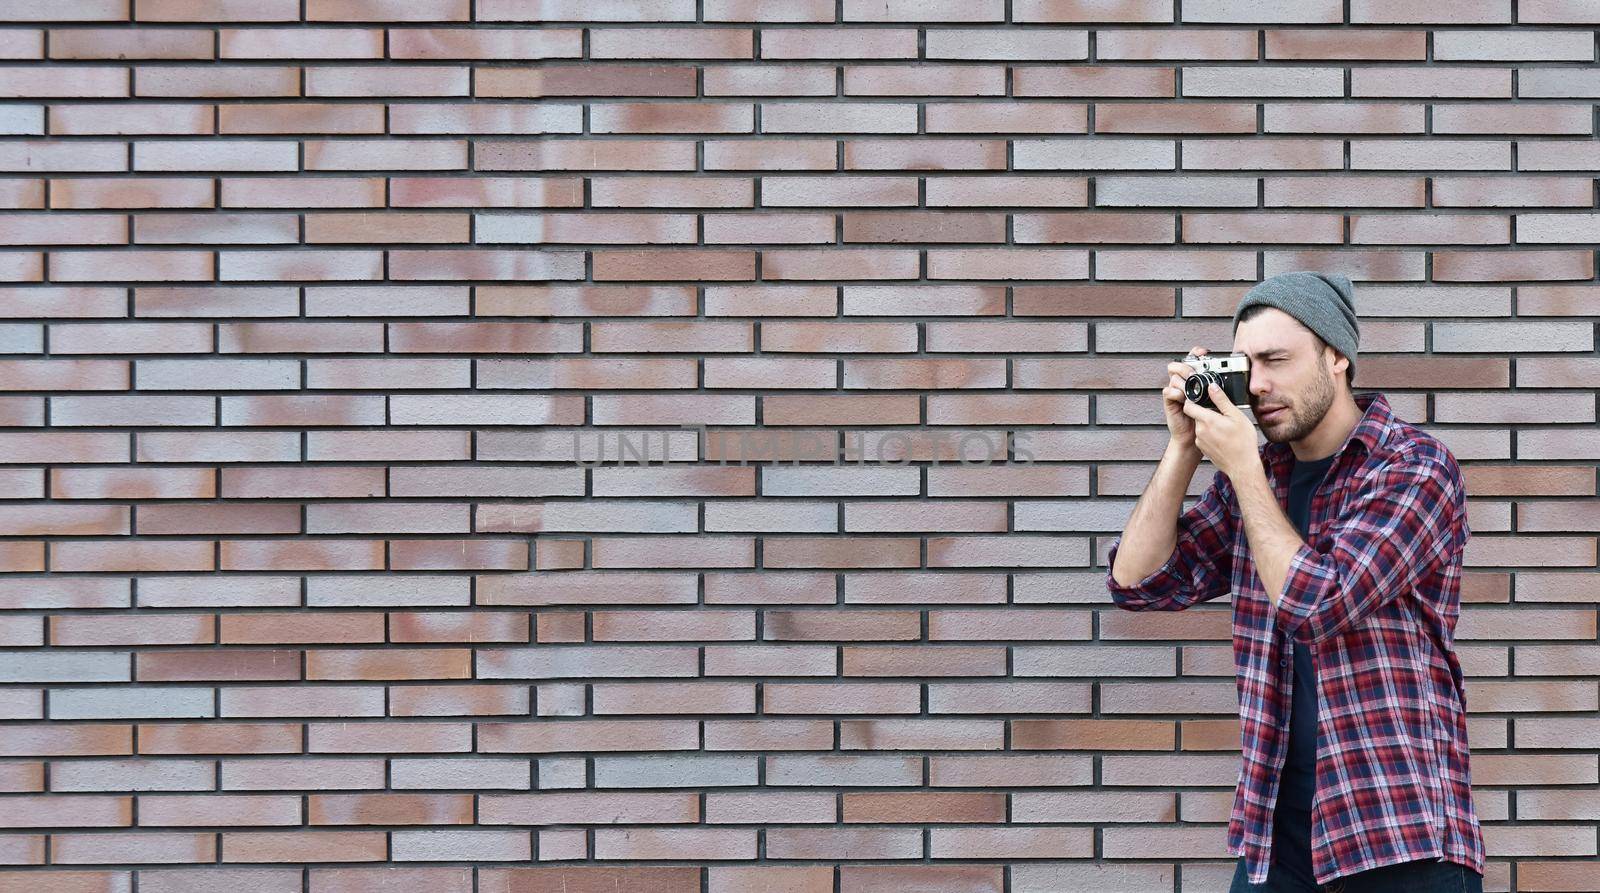 Say cheese, hipster fashion photographer man holding retro camera by Nickstock